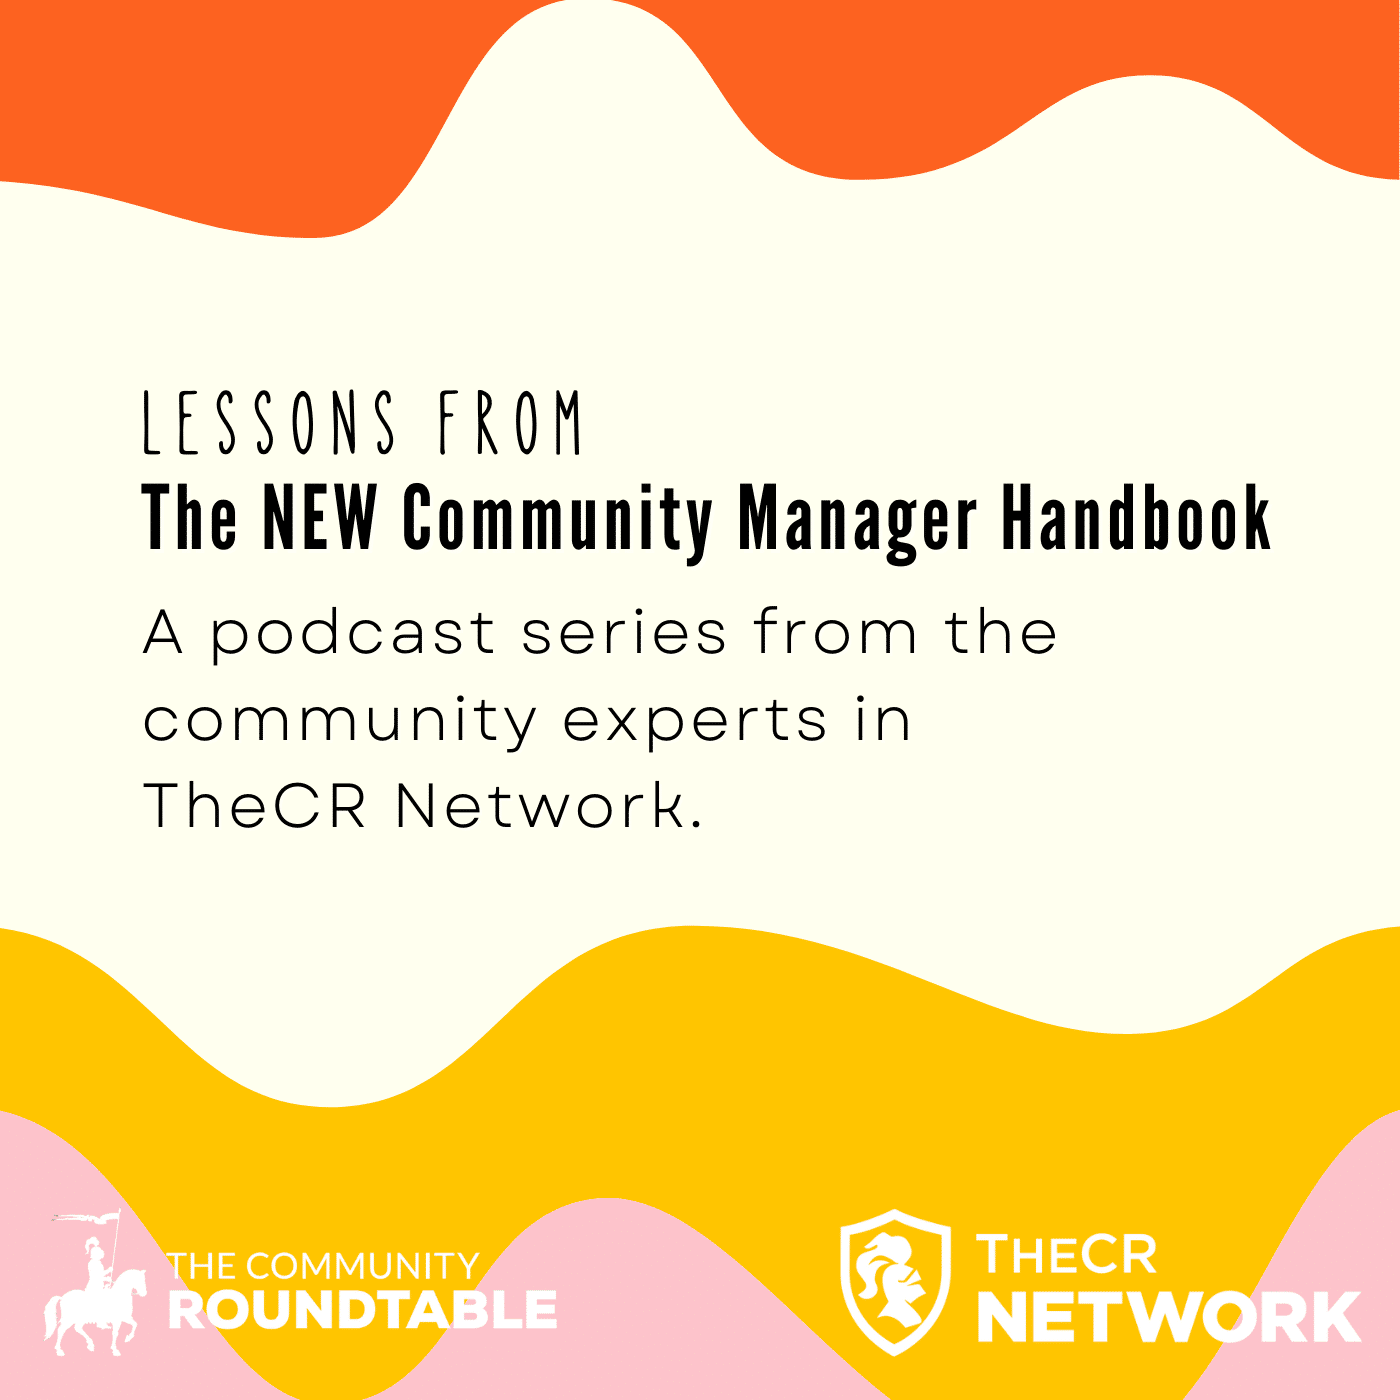 Lessons from The NEW Community Manager Handbook